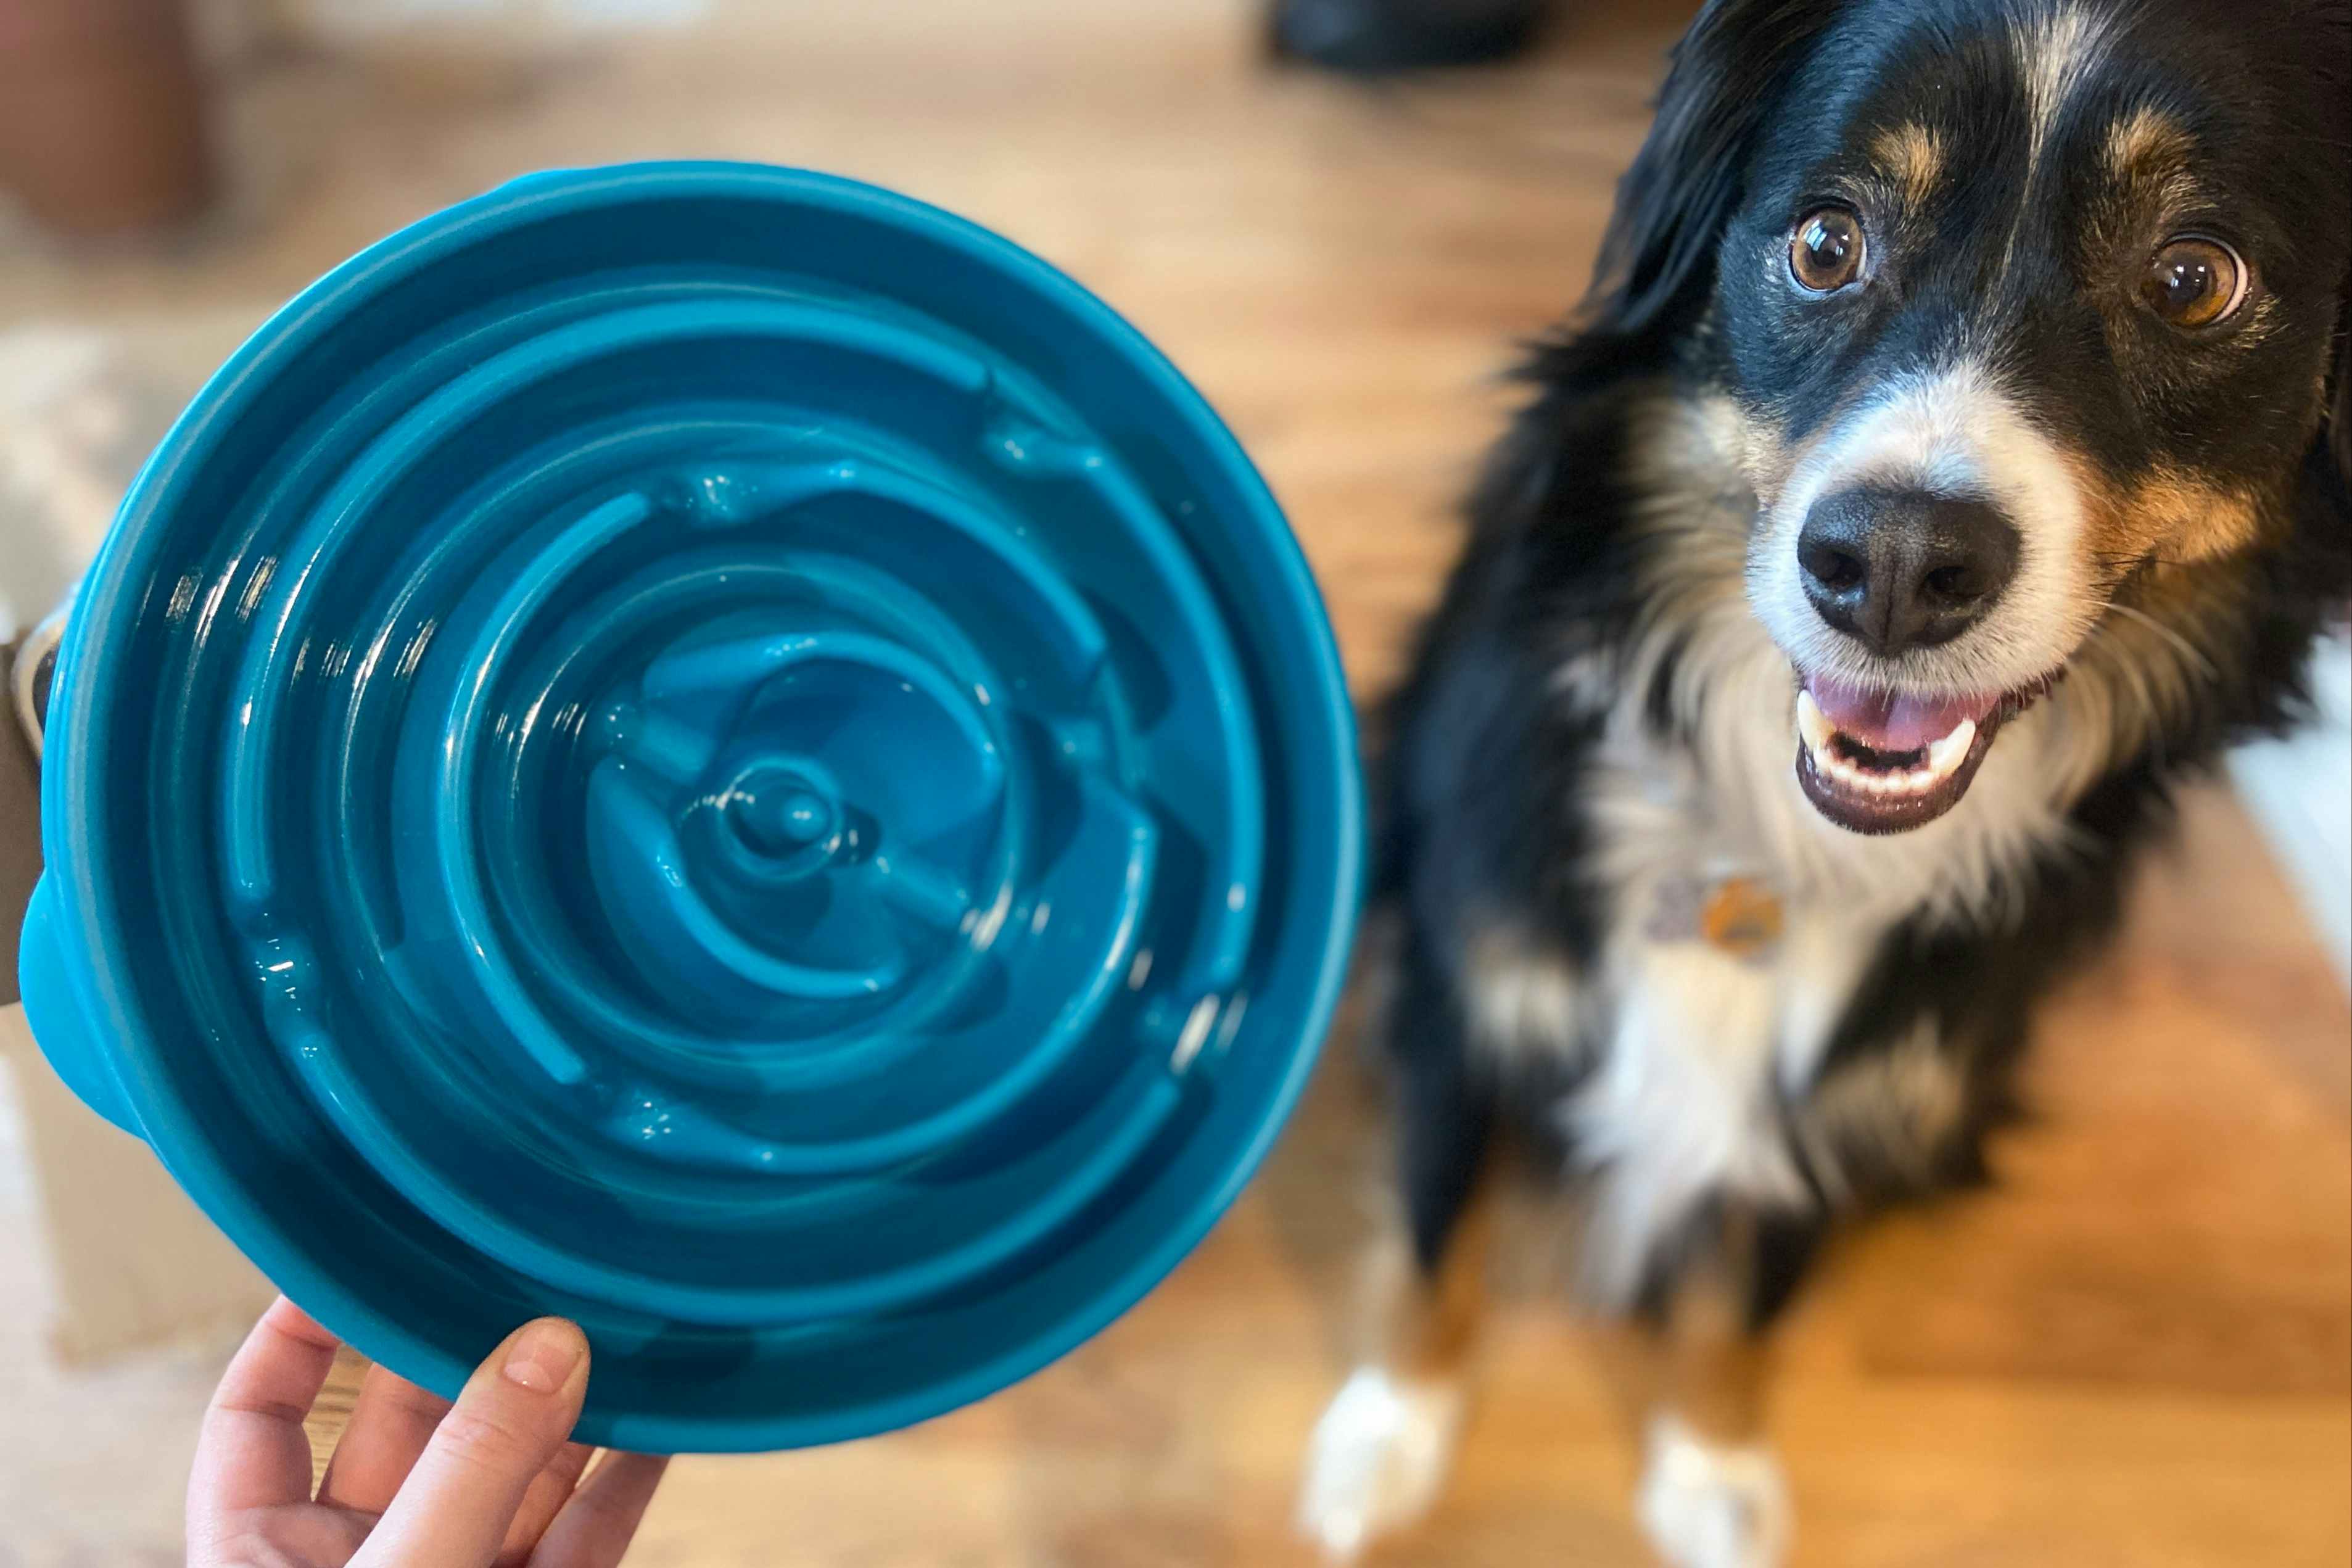 Outward Hound Slow Feeder Dog Bowl, Only $4.72 for Amazon Pet Day